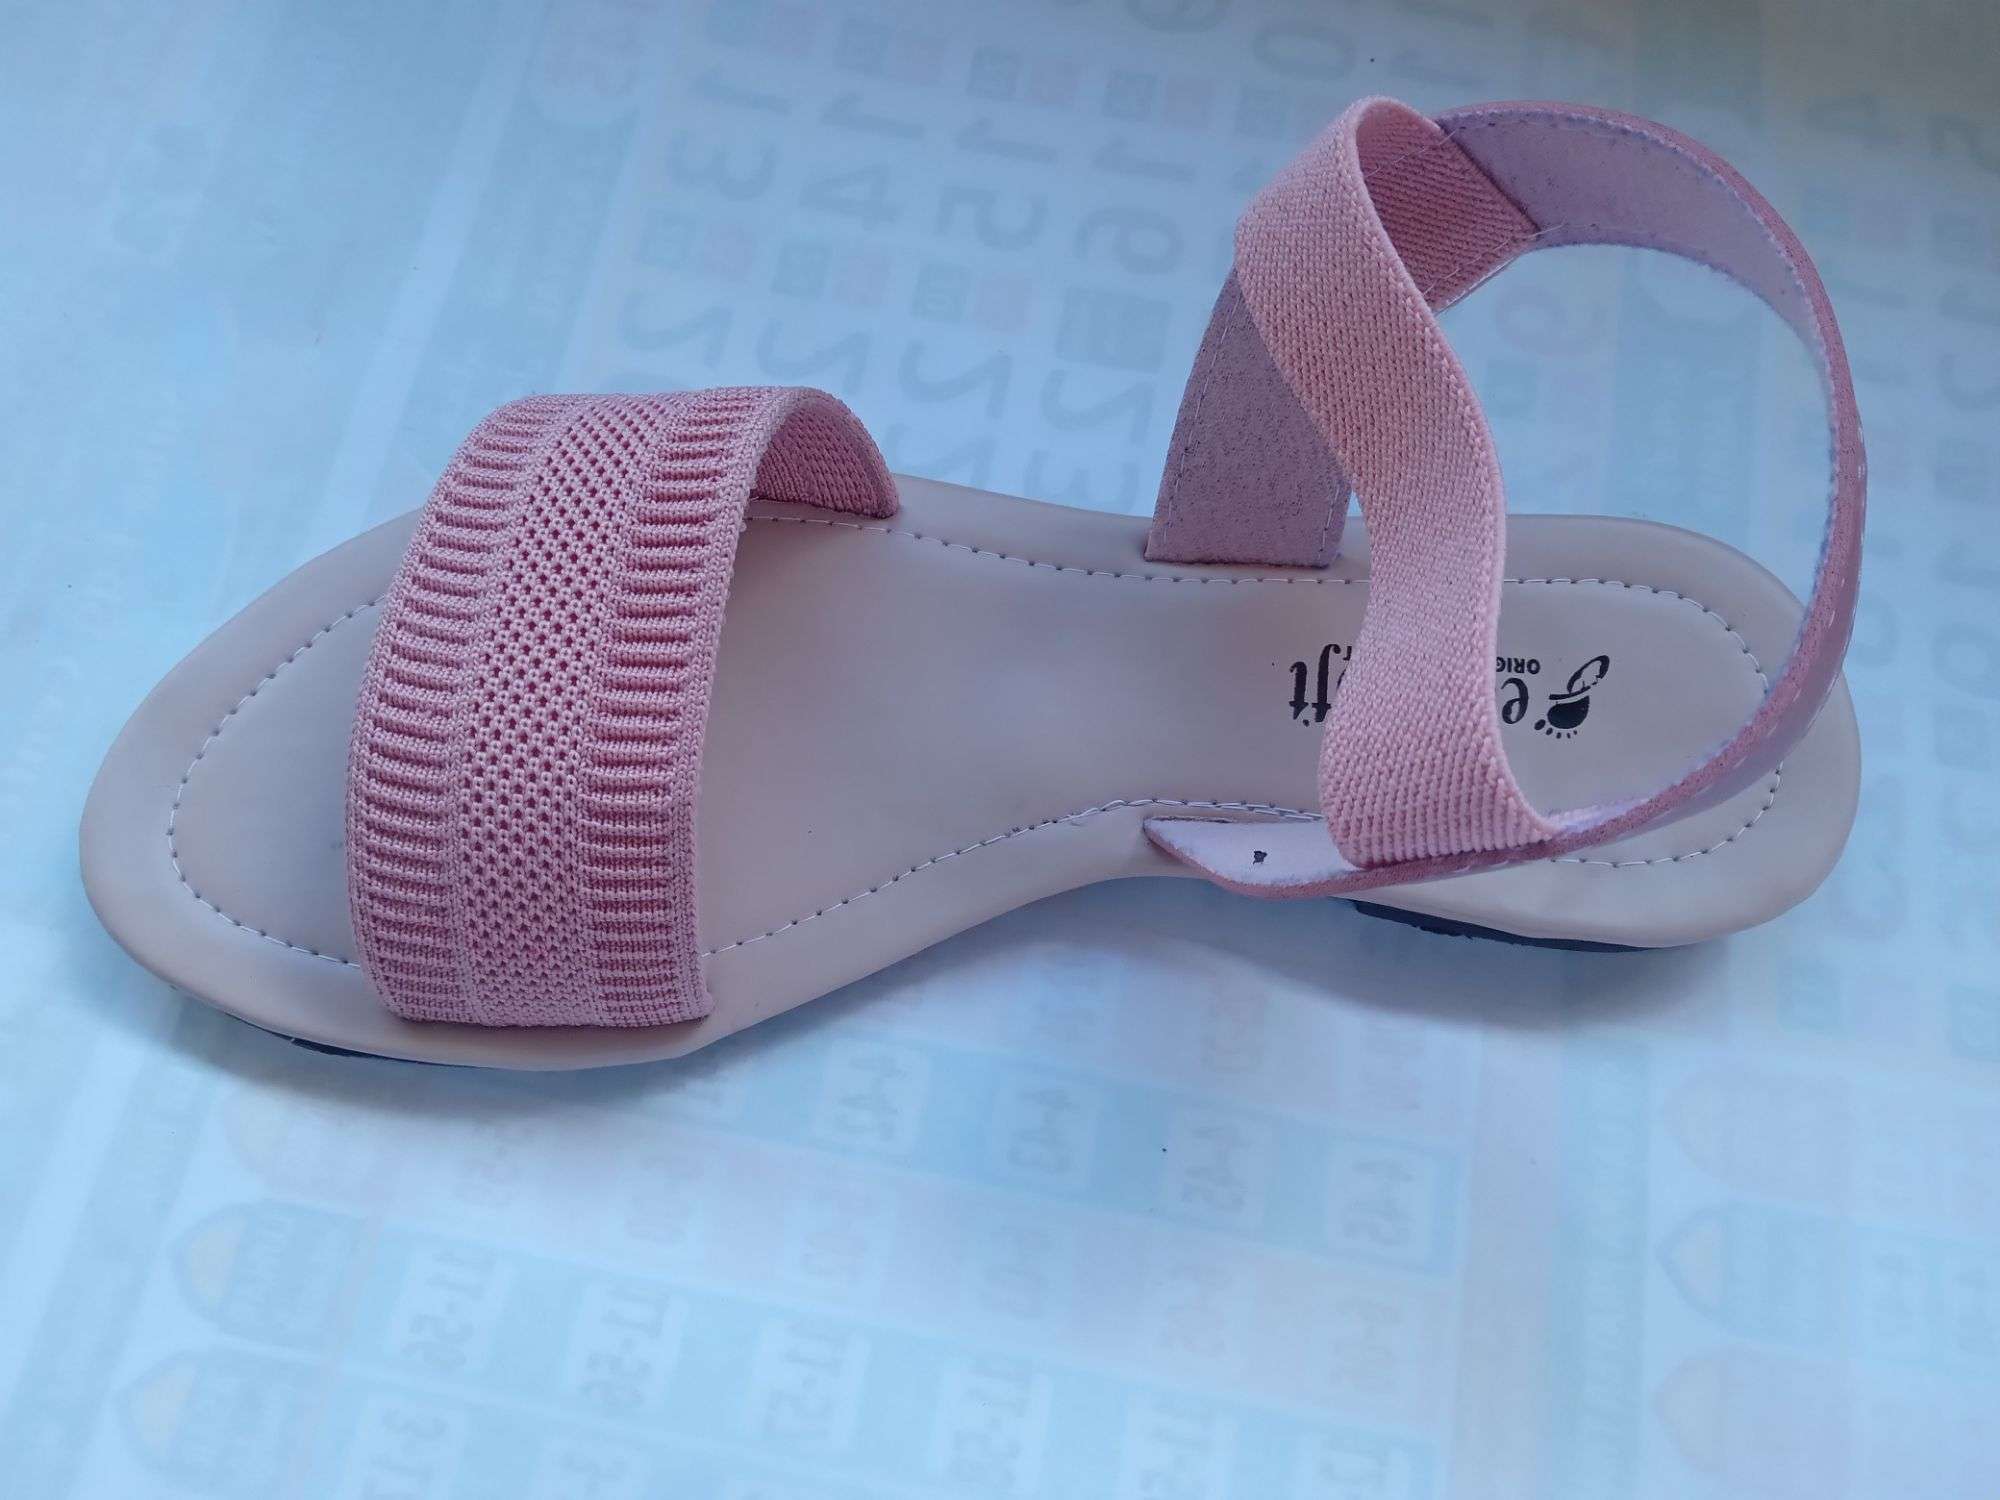 LEEFANT Beautiful Appearance Fashion Sandals/Girls Flat Slipper For All  Occasion looks Women Pink Flats - Buy LEEFANT Beautiful Appearance Fashion  Sandals/Girls Flat Slipper For All Occasion looks Women Pink Flats Online at